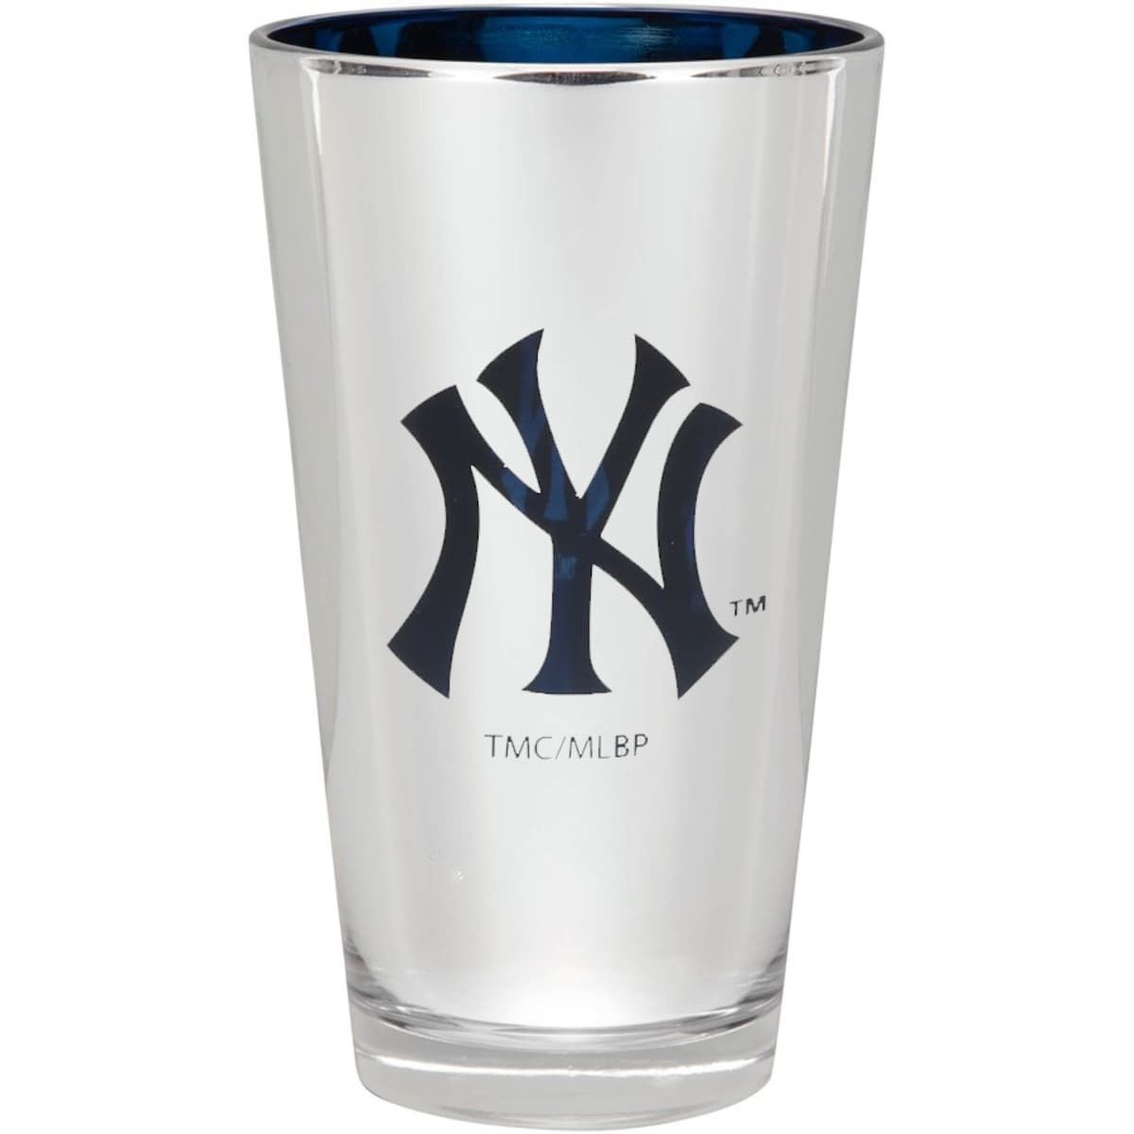 New York Yankees 16oz. Electroplated Pint Glass - Image 2 of 2